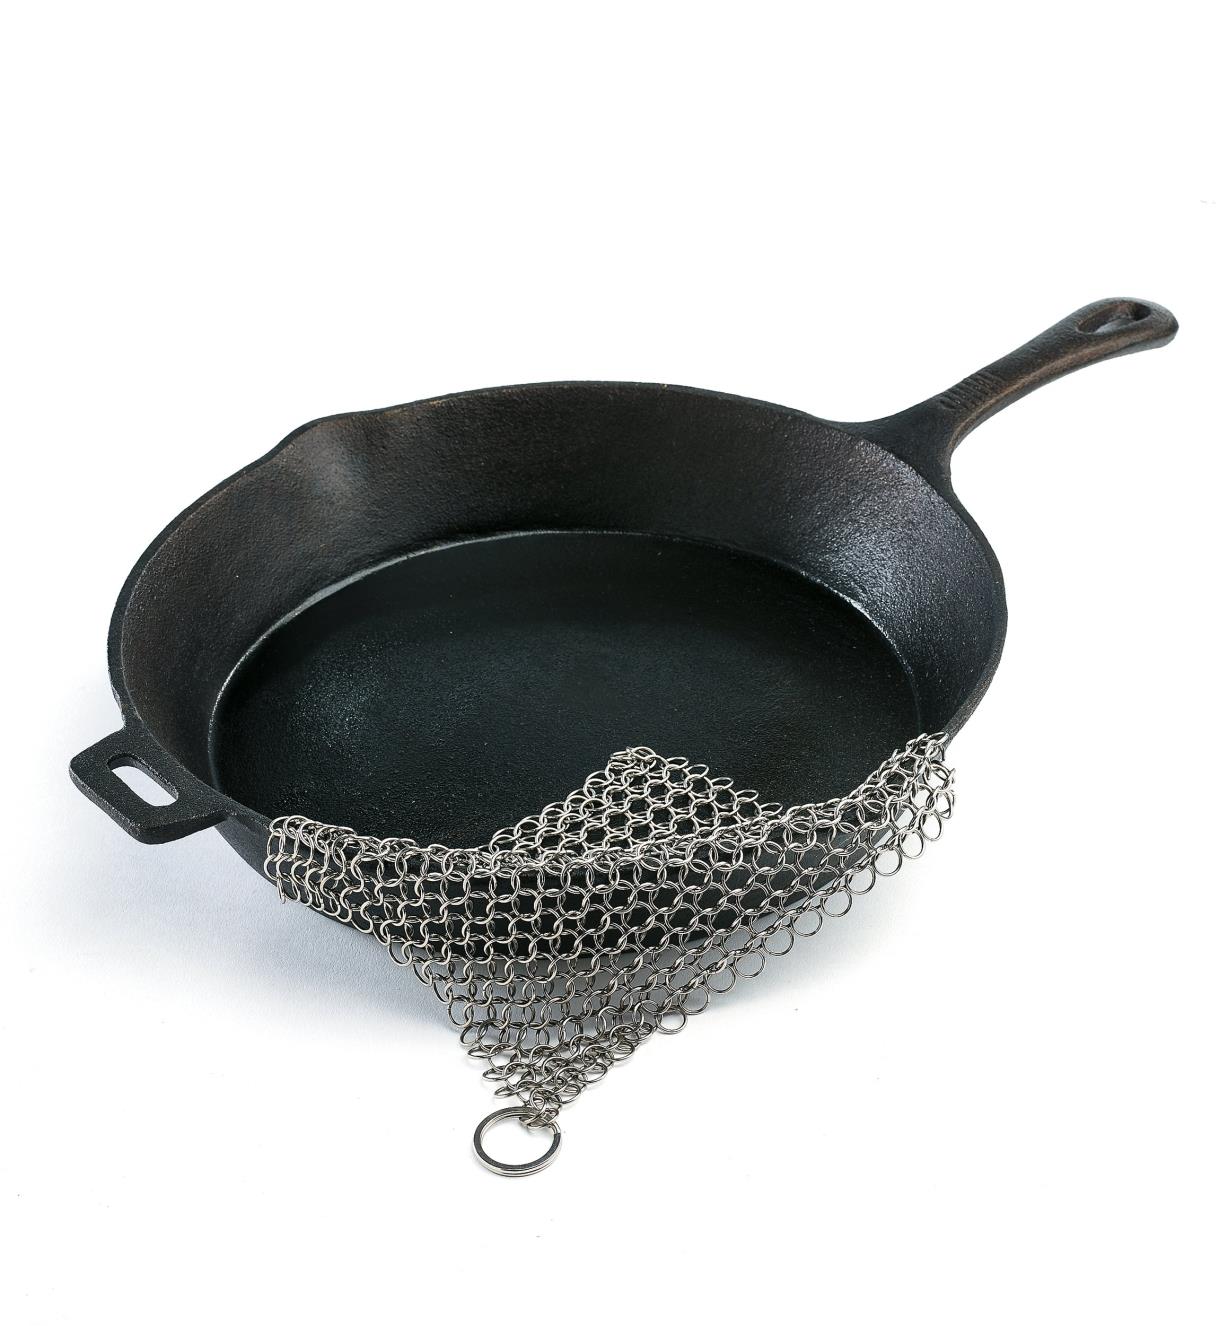 DB309 - Stainless-Steel Chain Mail Scrubber